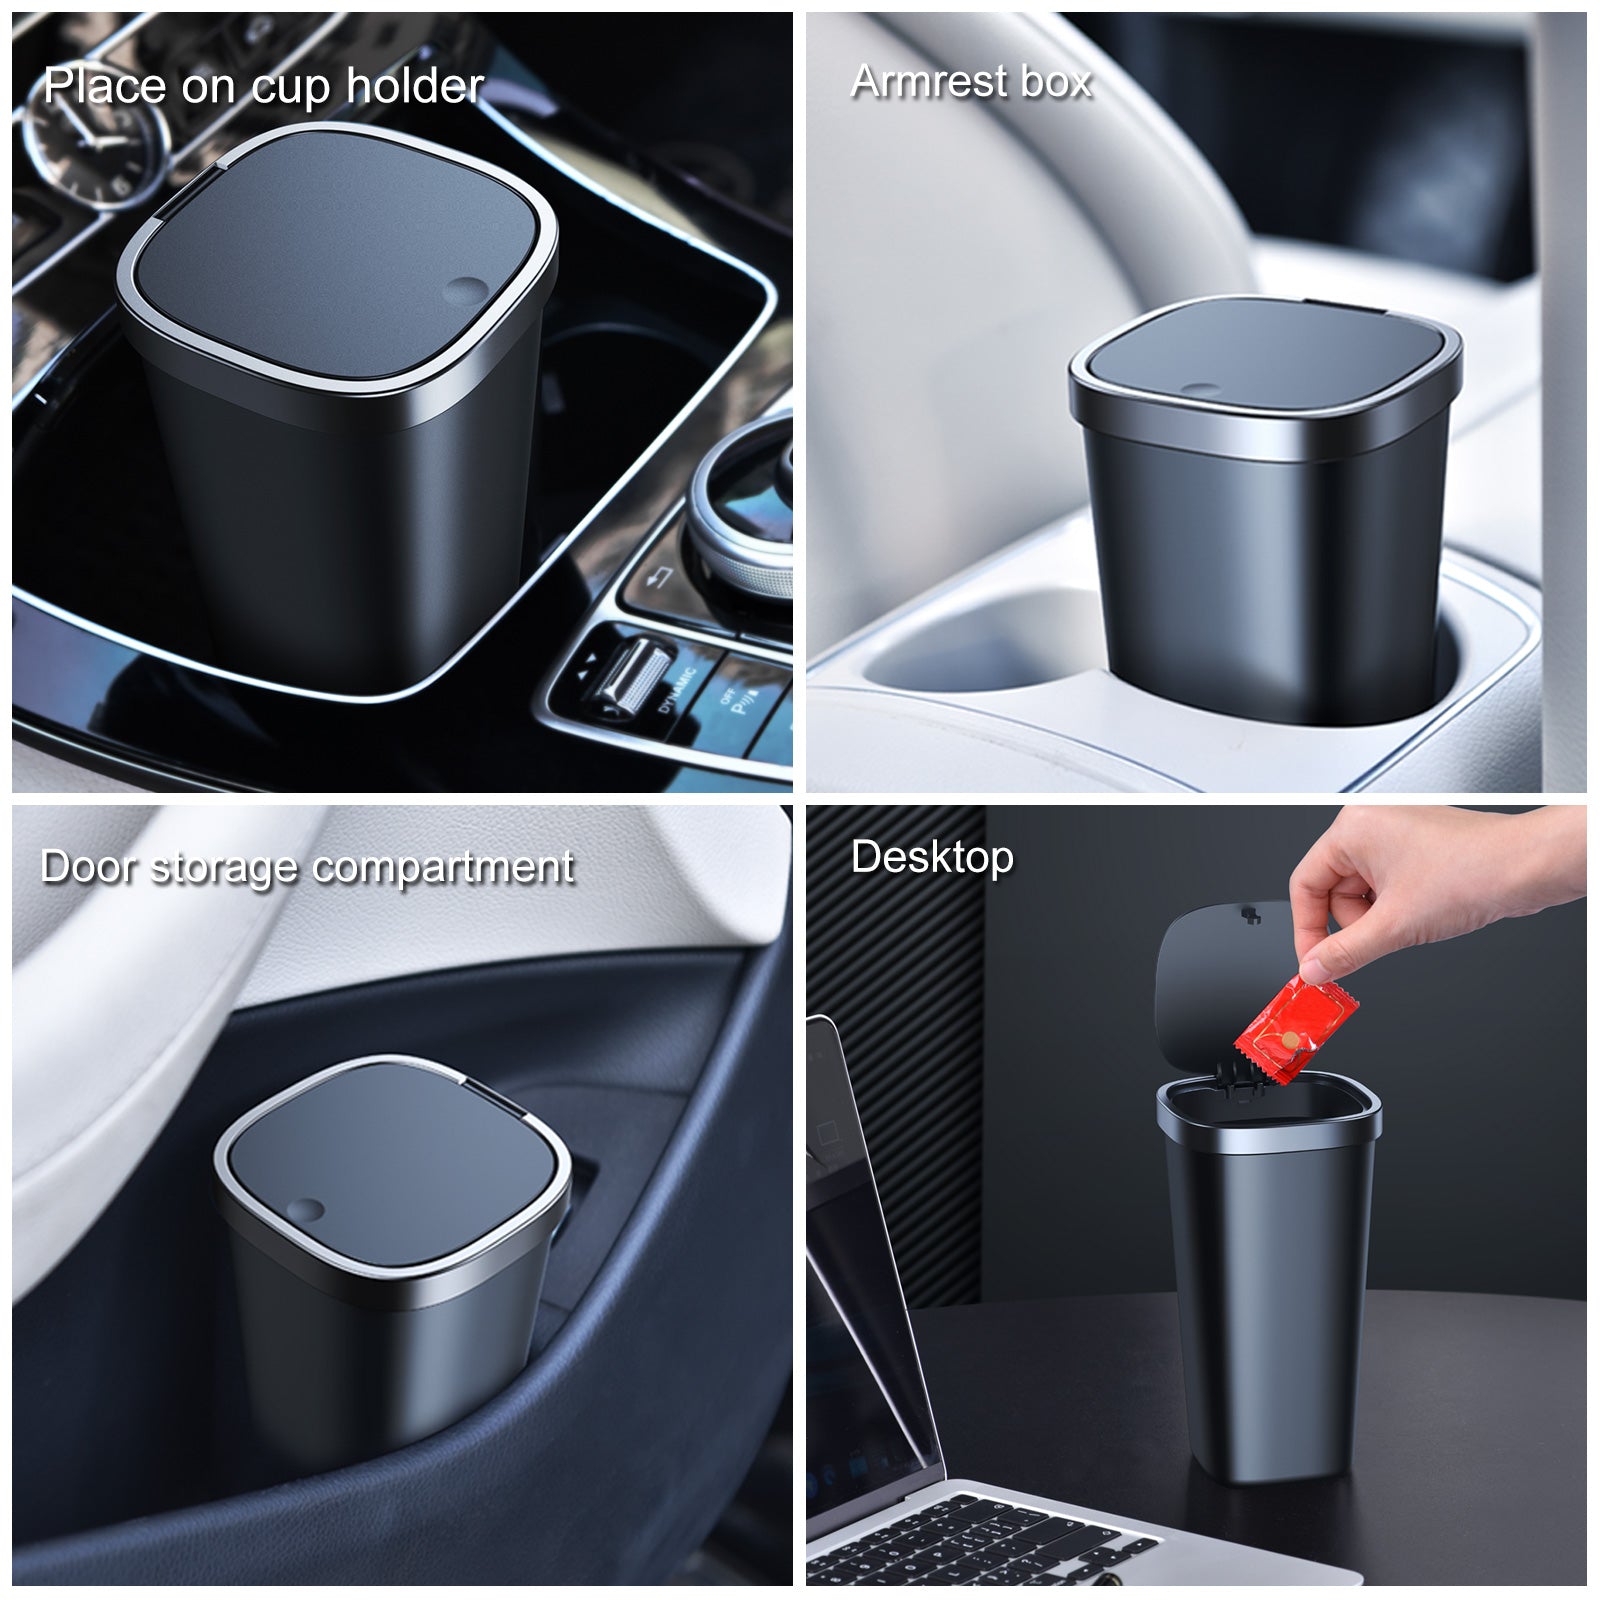 QUICTO Car Trash Can, Portable Hangable Waterproof Bag, Universal Foldable  Pop-up Trash Can, Car Accessories for Organizing Car Trash